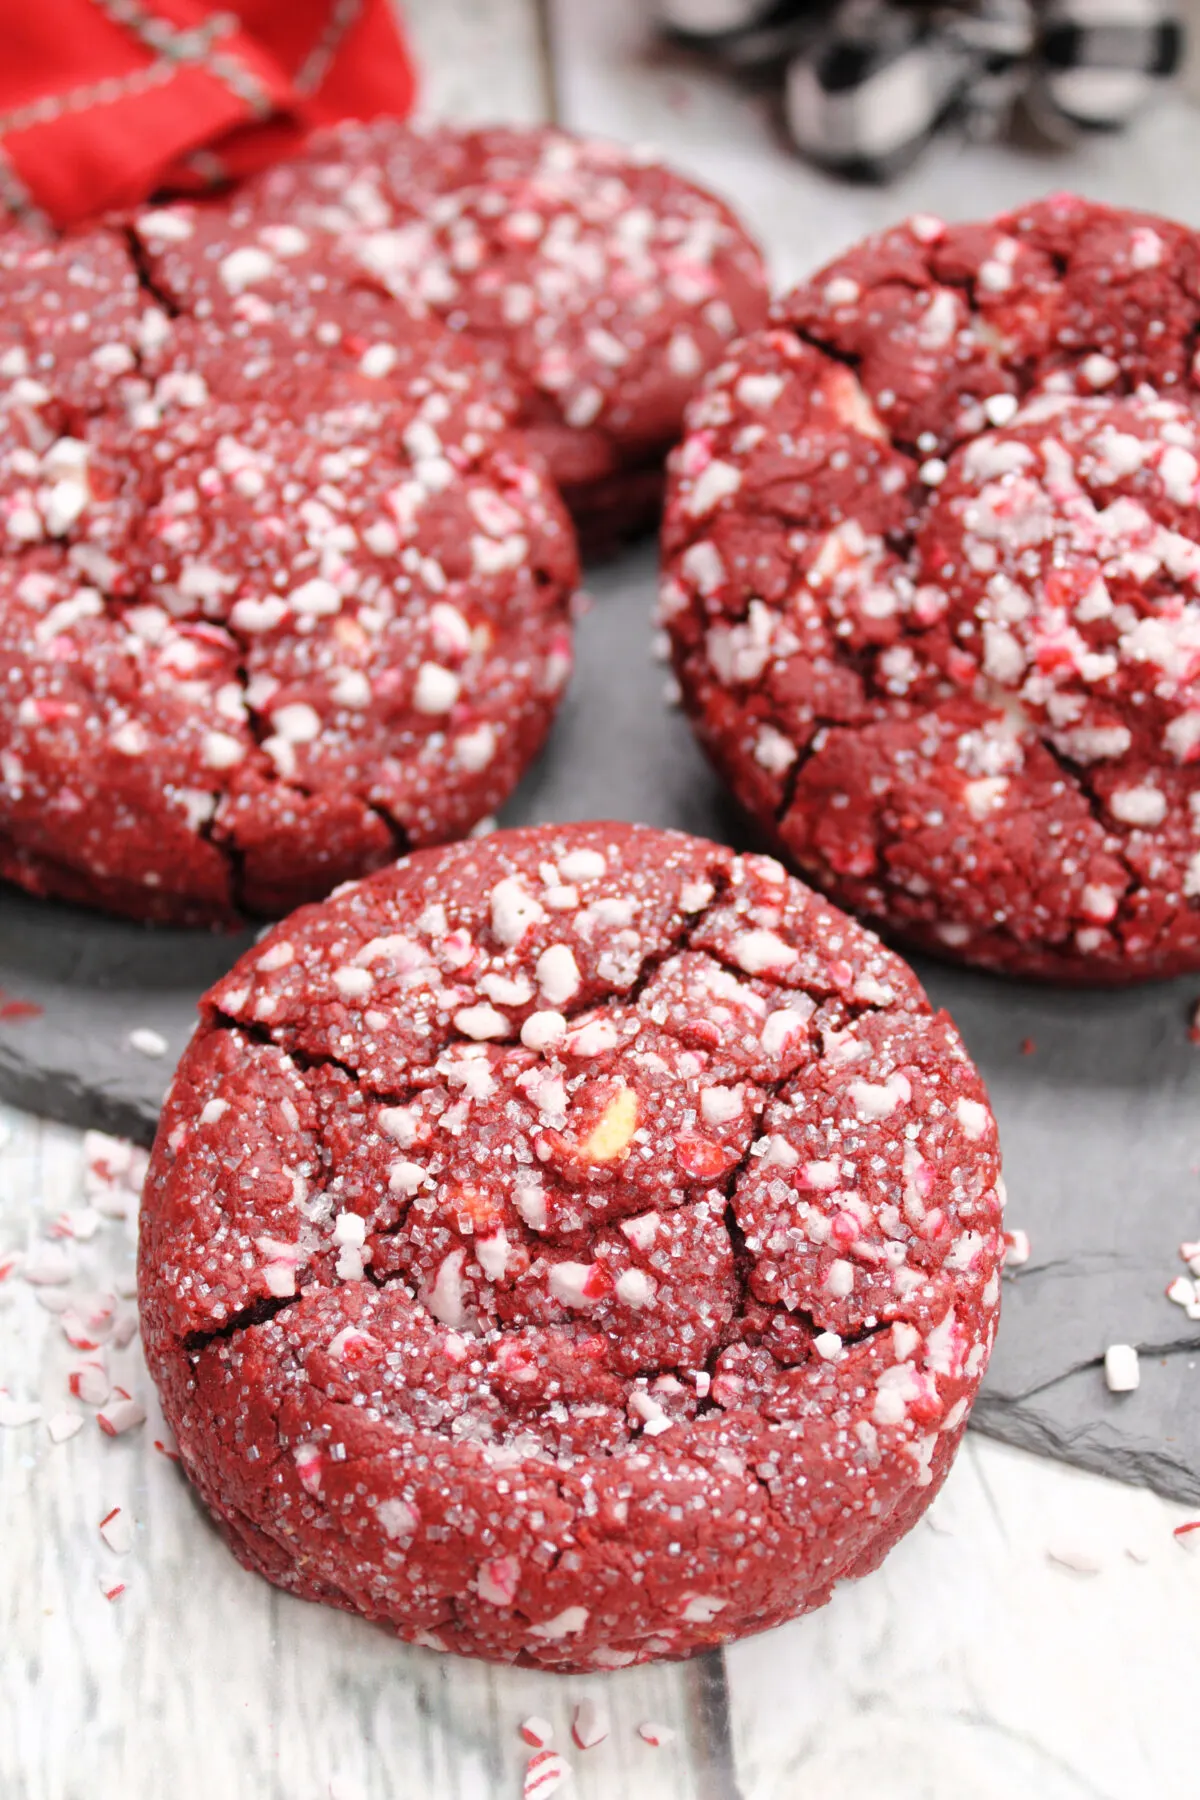 These candy cane stuffed red velvet cookies are a festive addition to your holiday party or cookie exchange!